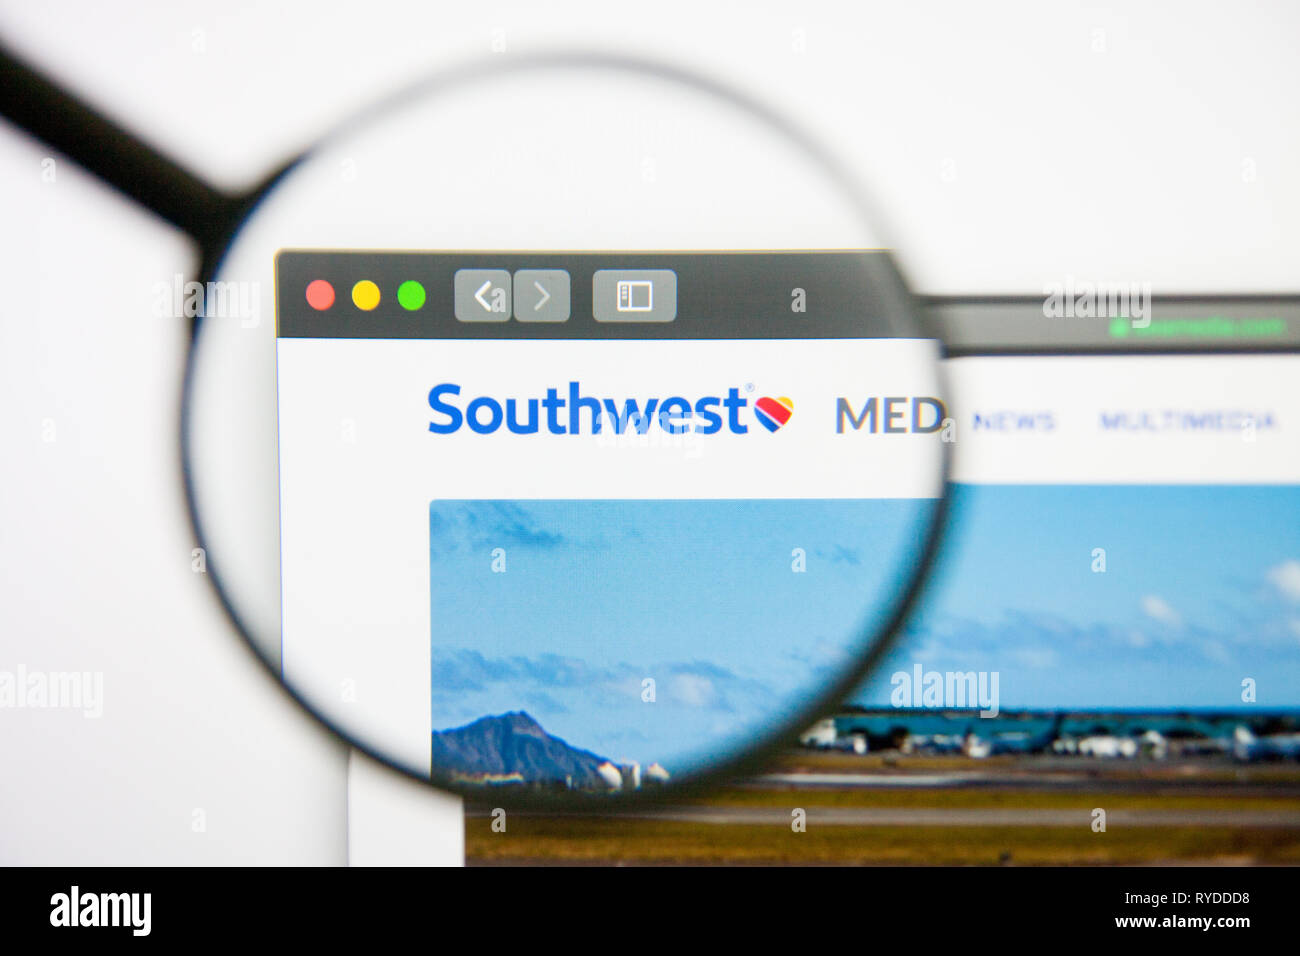 Los Angeles, California, USA - 14 February 2019: Southwest Airlines website homepage. Southwest Airlines logo visible on screen. Stock Photo